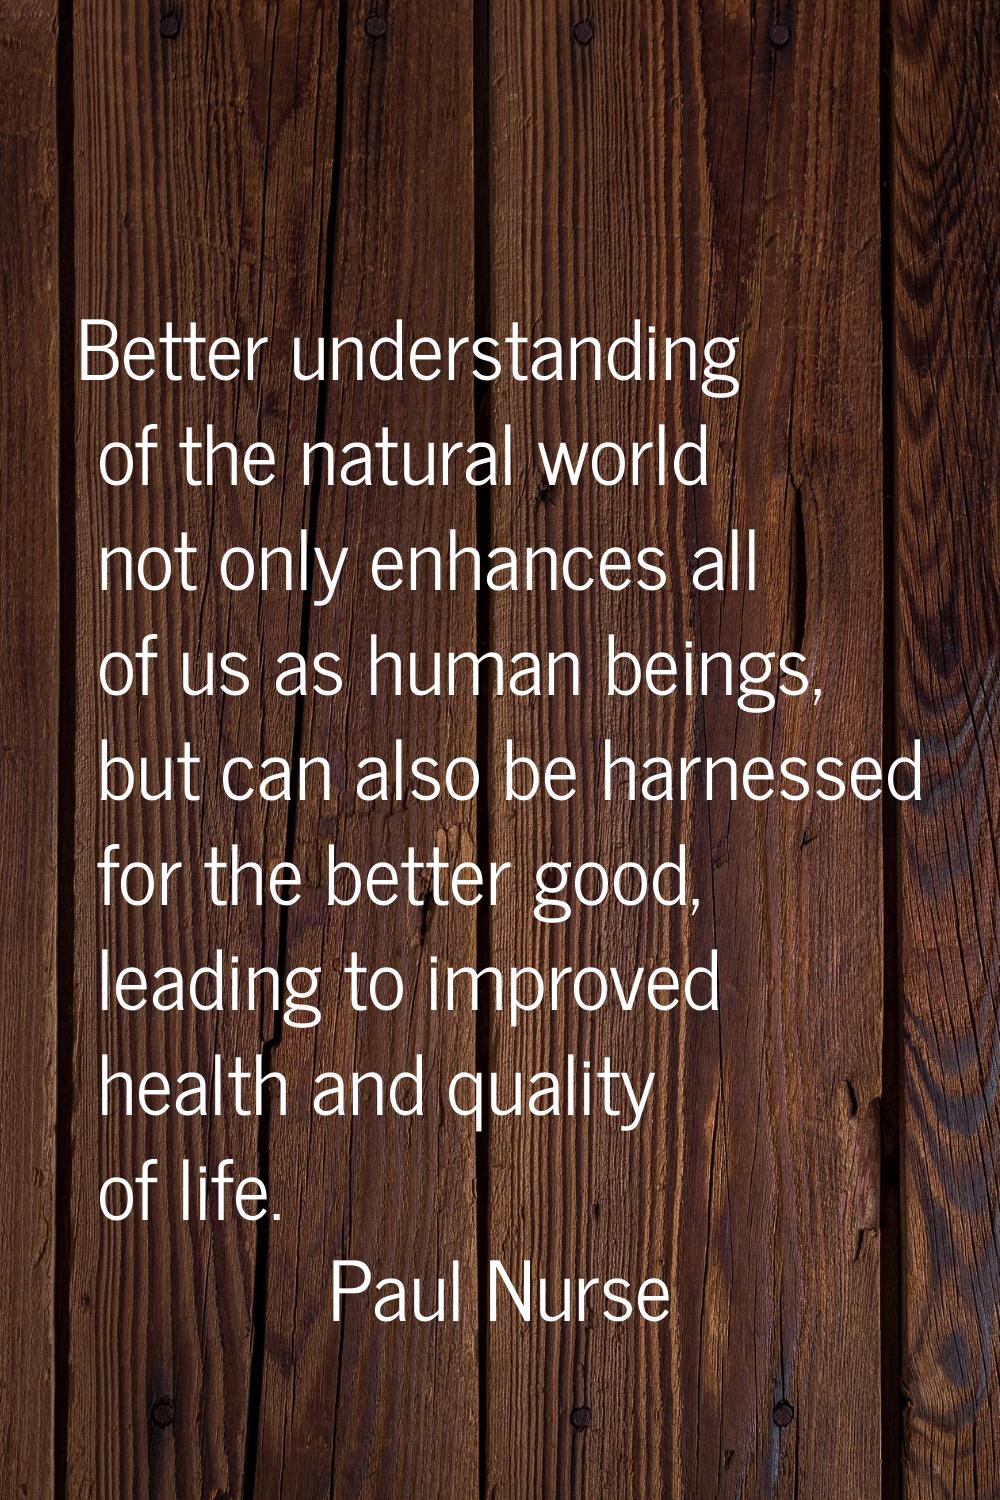 Better understanding of the natural world not only enhances all of us as human beings, but can also